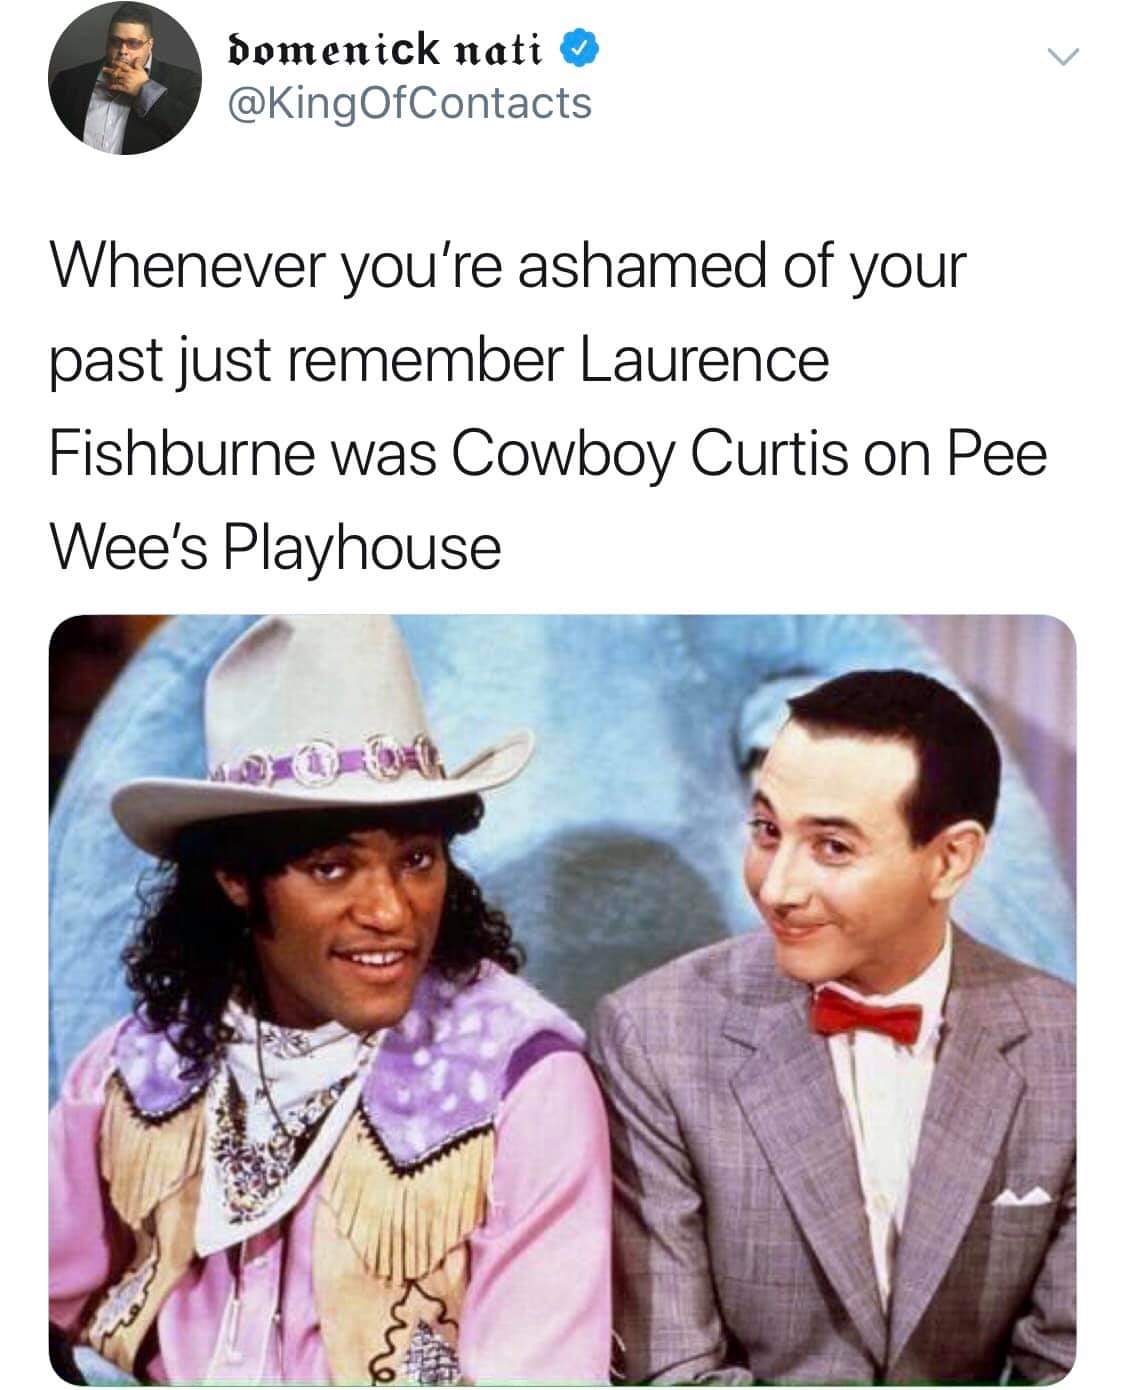 meme - cowboy curtis morpheus - domenick nati Whenever you're ashamed of your past just remember Laurence Fishburne was Cowboy Curtis on Pee Wee's Playhouse